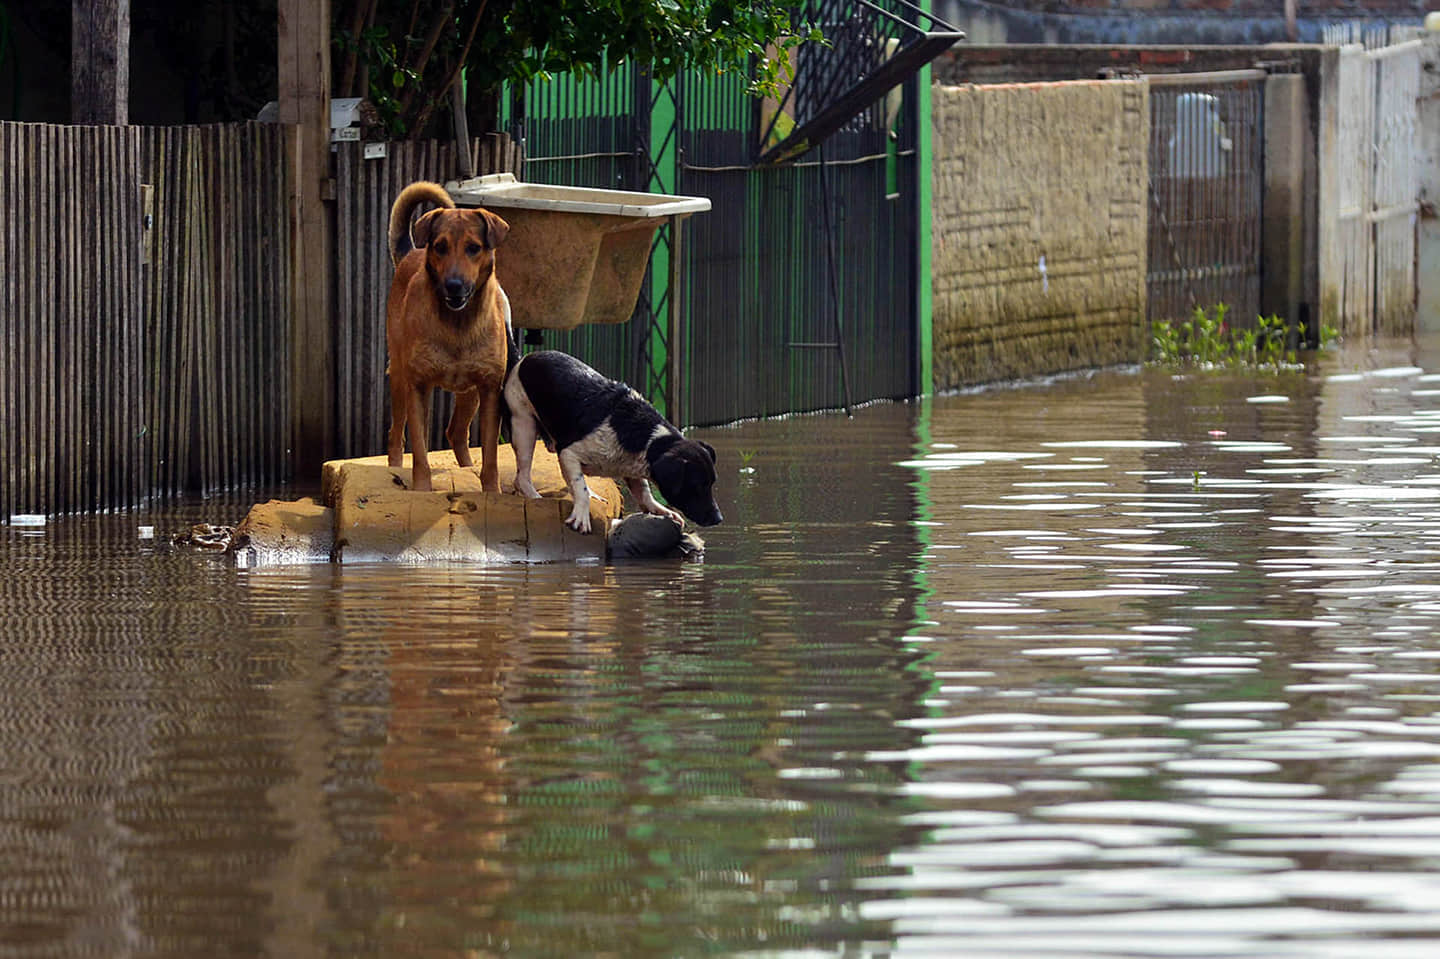 Two stranded dogs in the flood water in Rio Grande do Sul state, Brazil